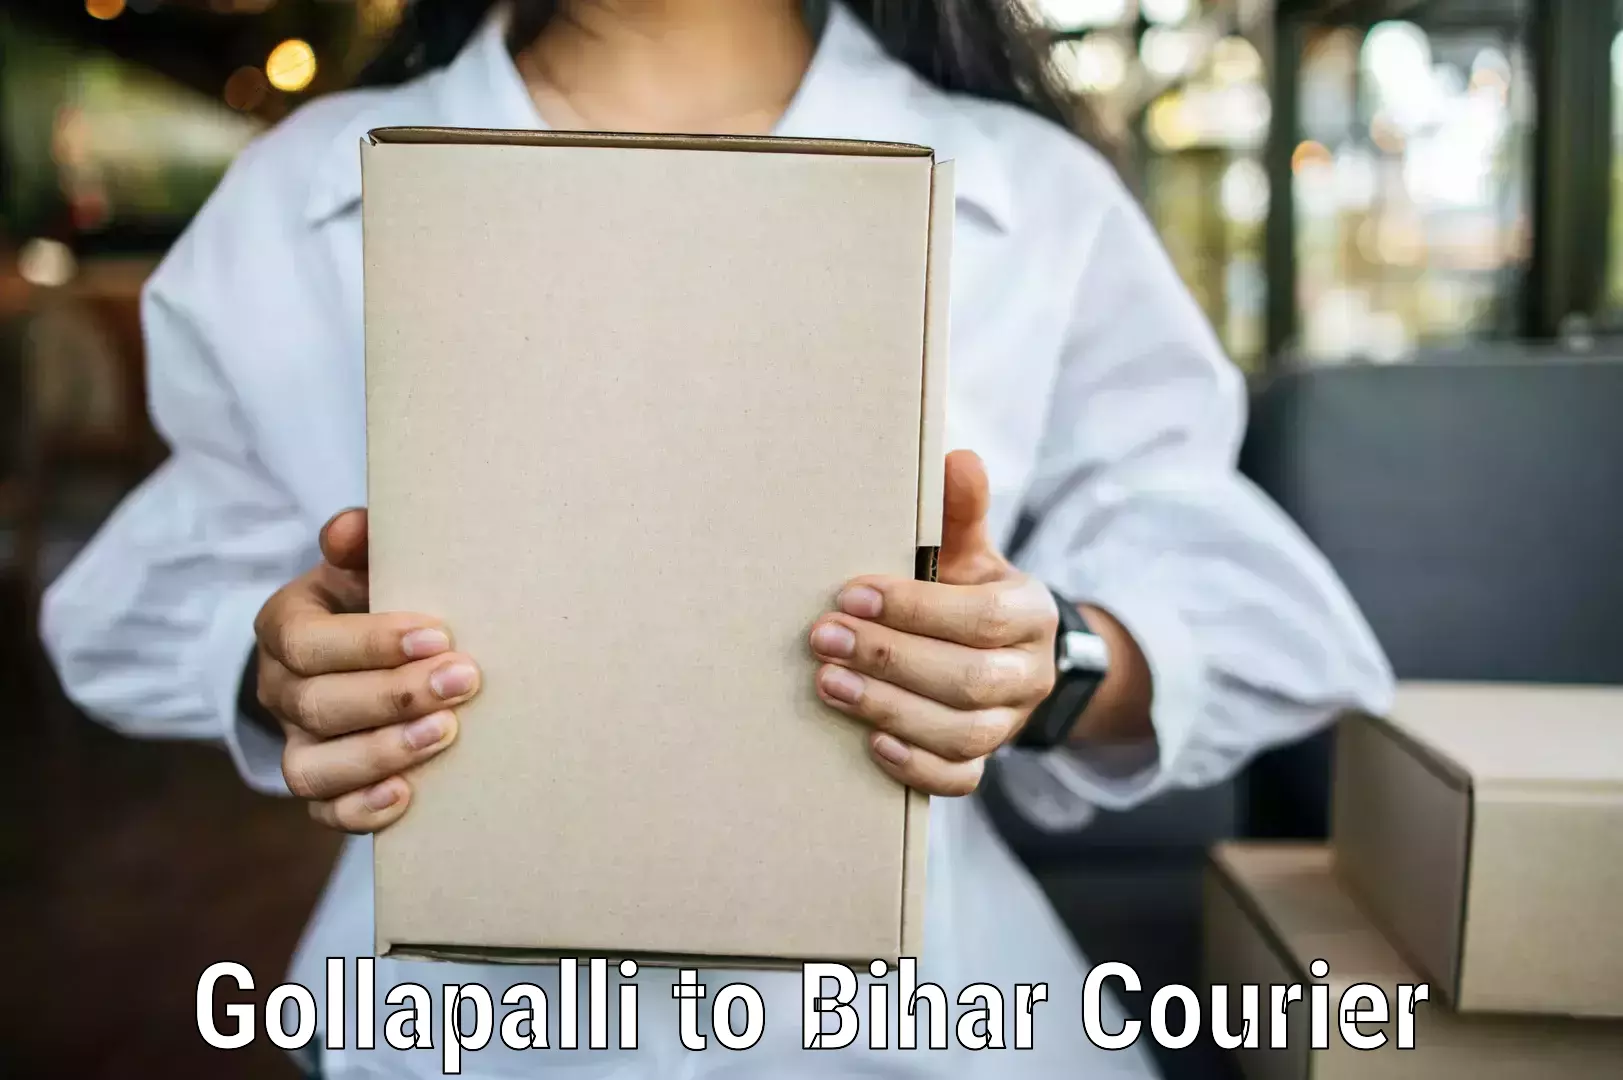 Residential courier service Gollapalli to Rajpur